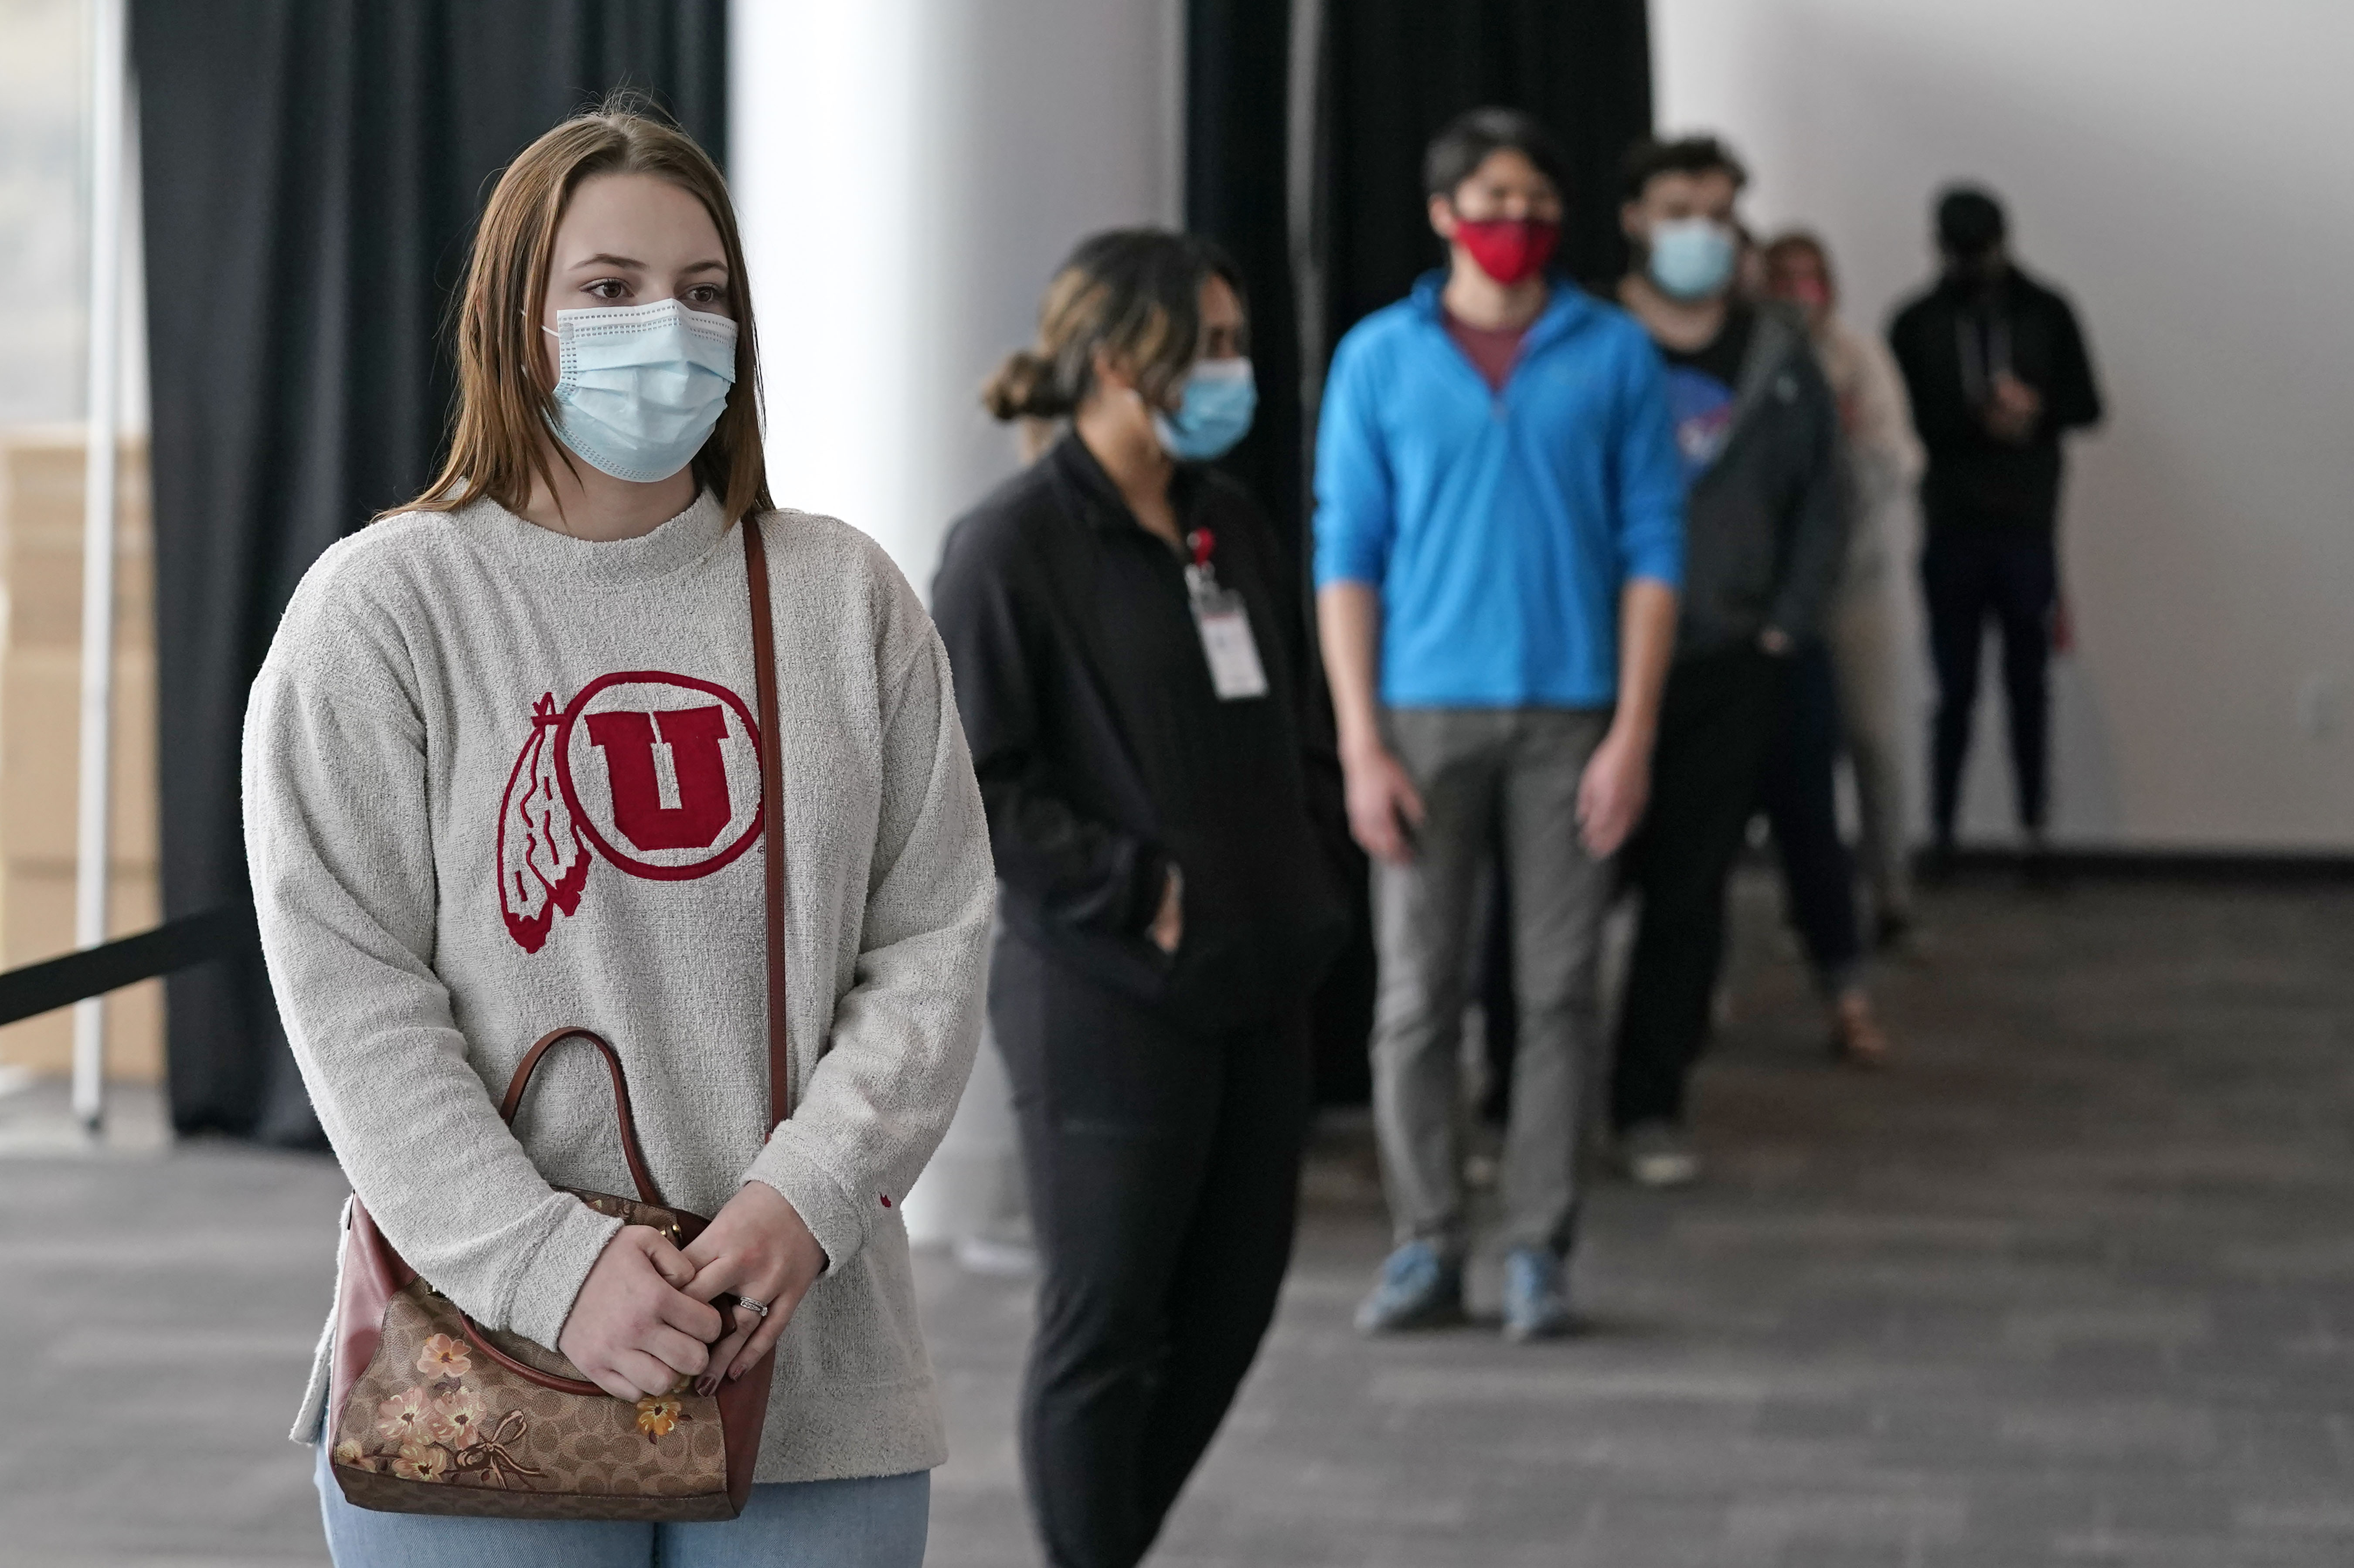 University of Utah student Abigail Shull waits in line before taking a rapid Covid-19 test at the University of Utah student testing site on Wednesday, Nov. 18, 2020, in Salt Lake City.